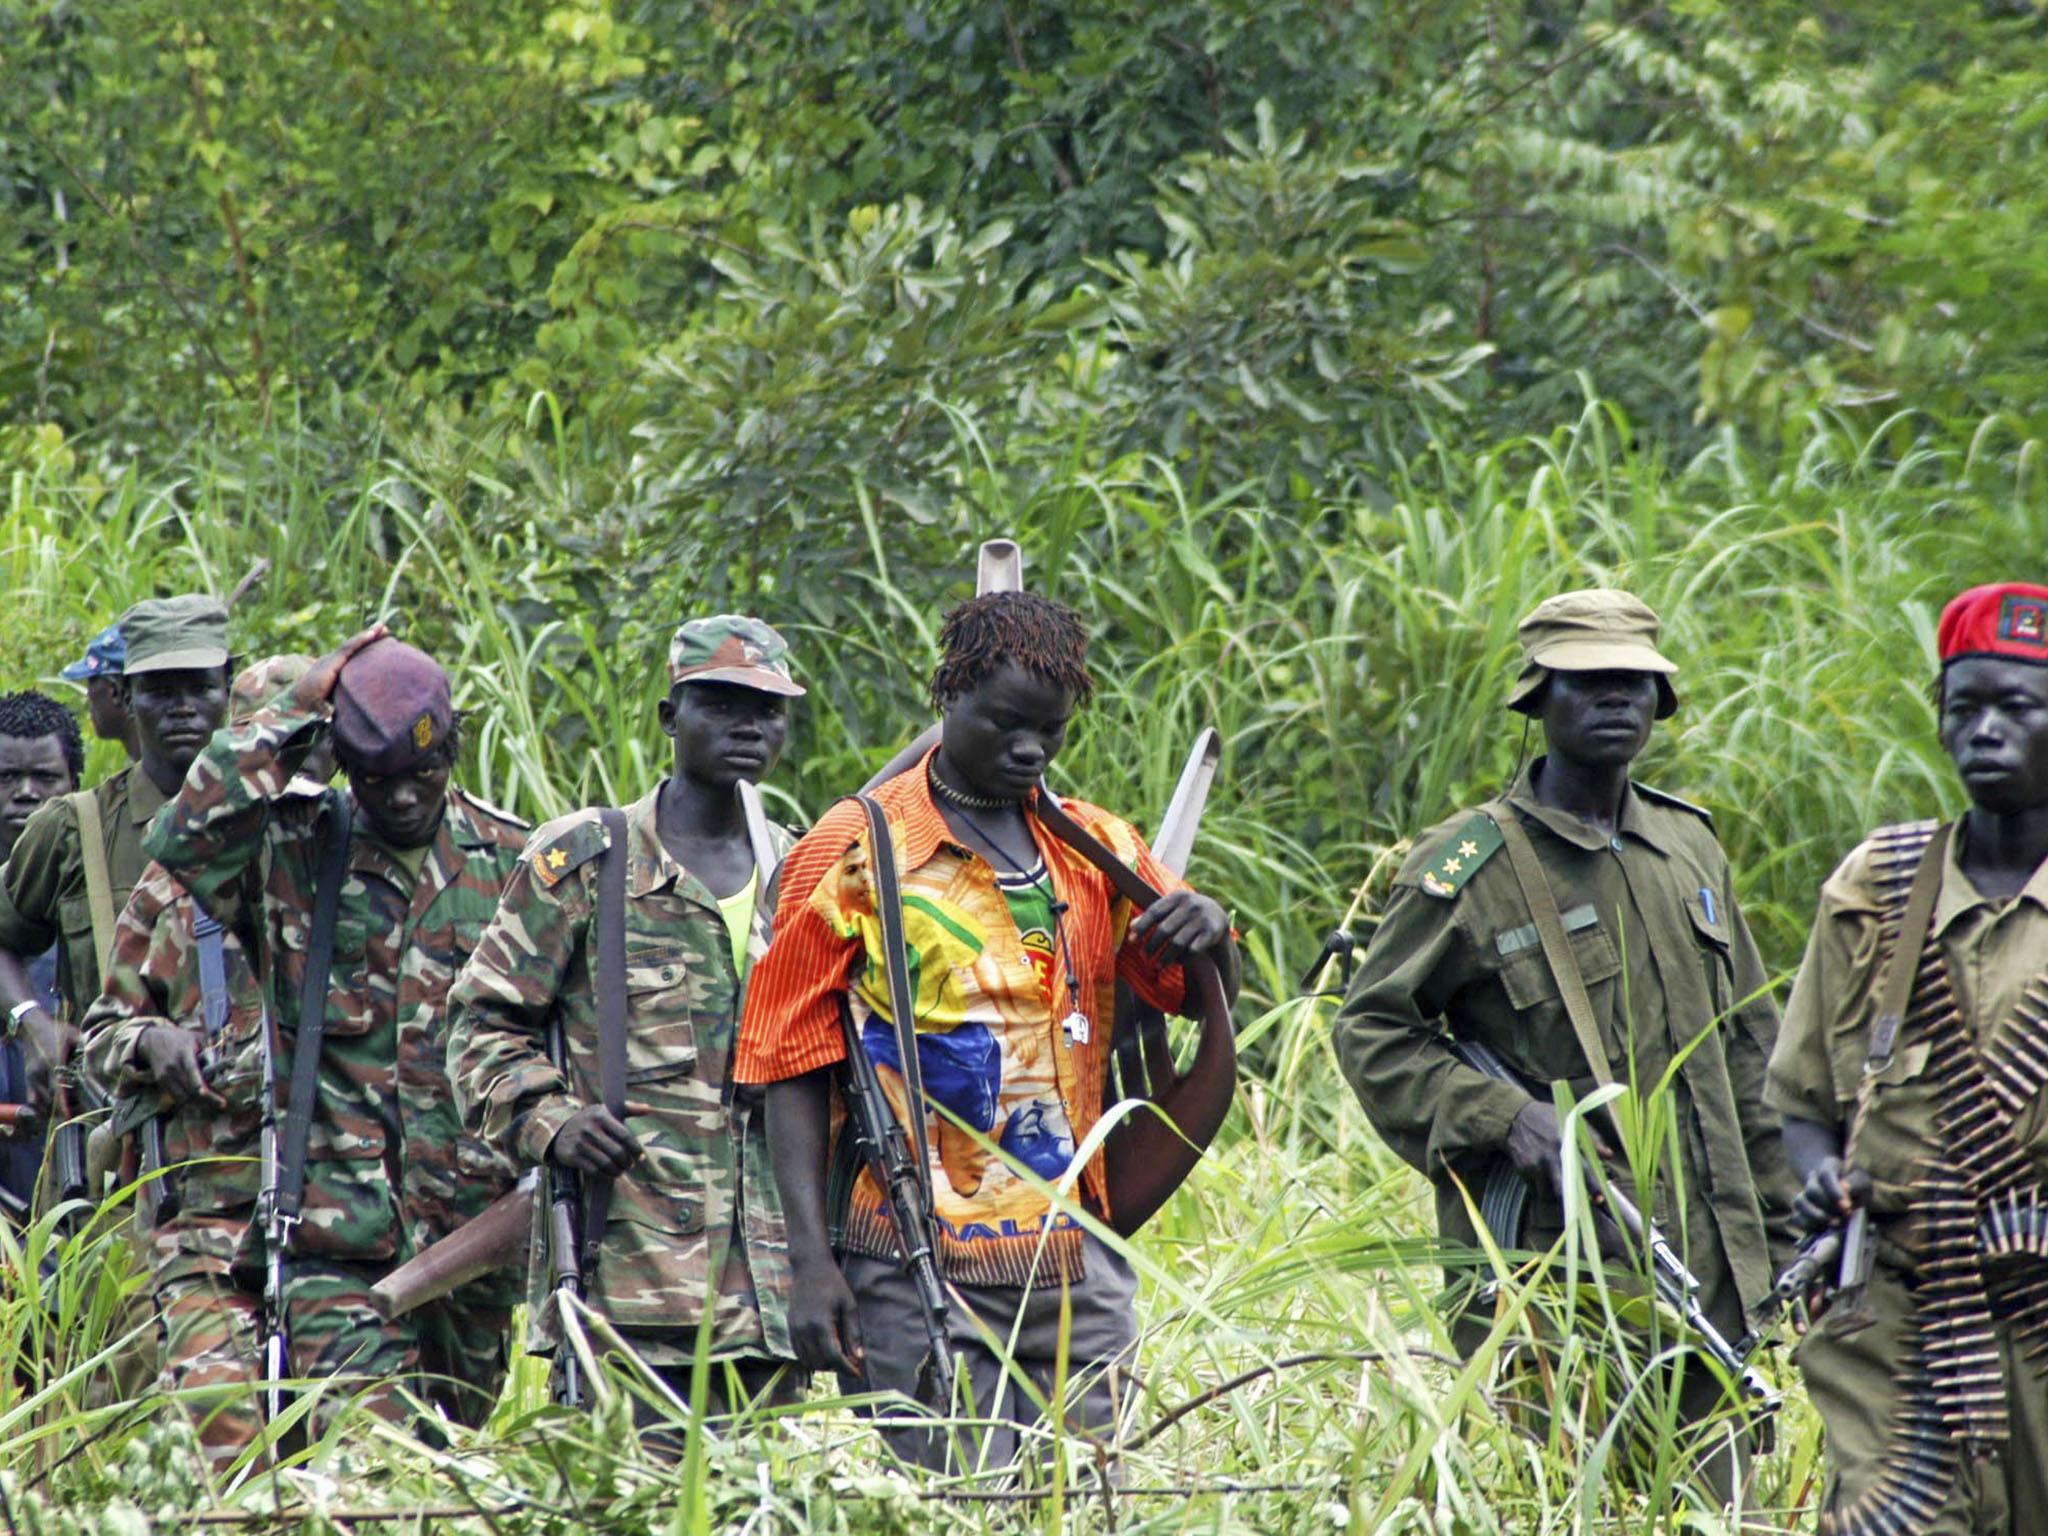 Members of Joseph Kony’s LRA, which killed more than 100,000 people over three decades